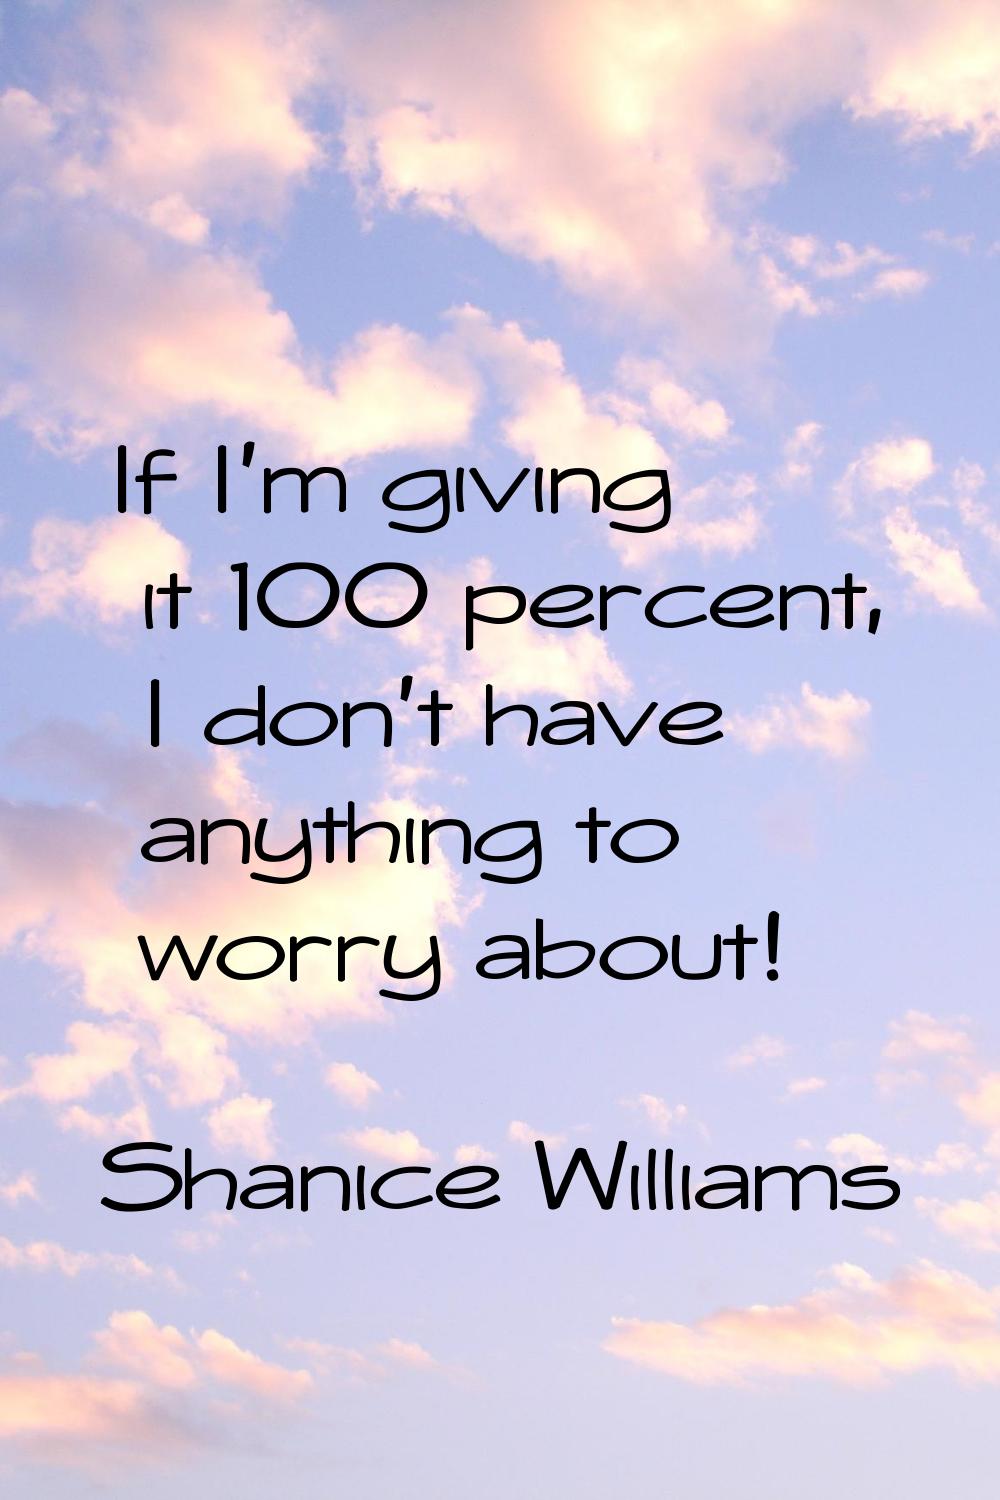 If I'm giving it 100 percent, I don't have anything to worry about!